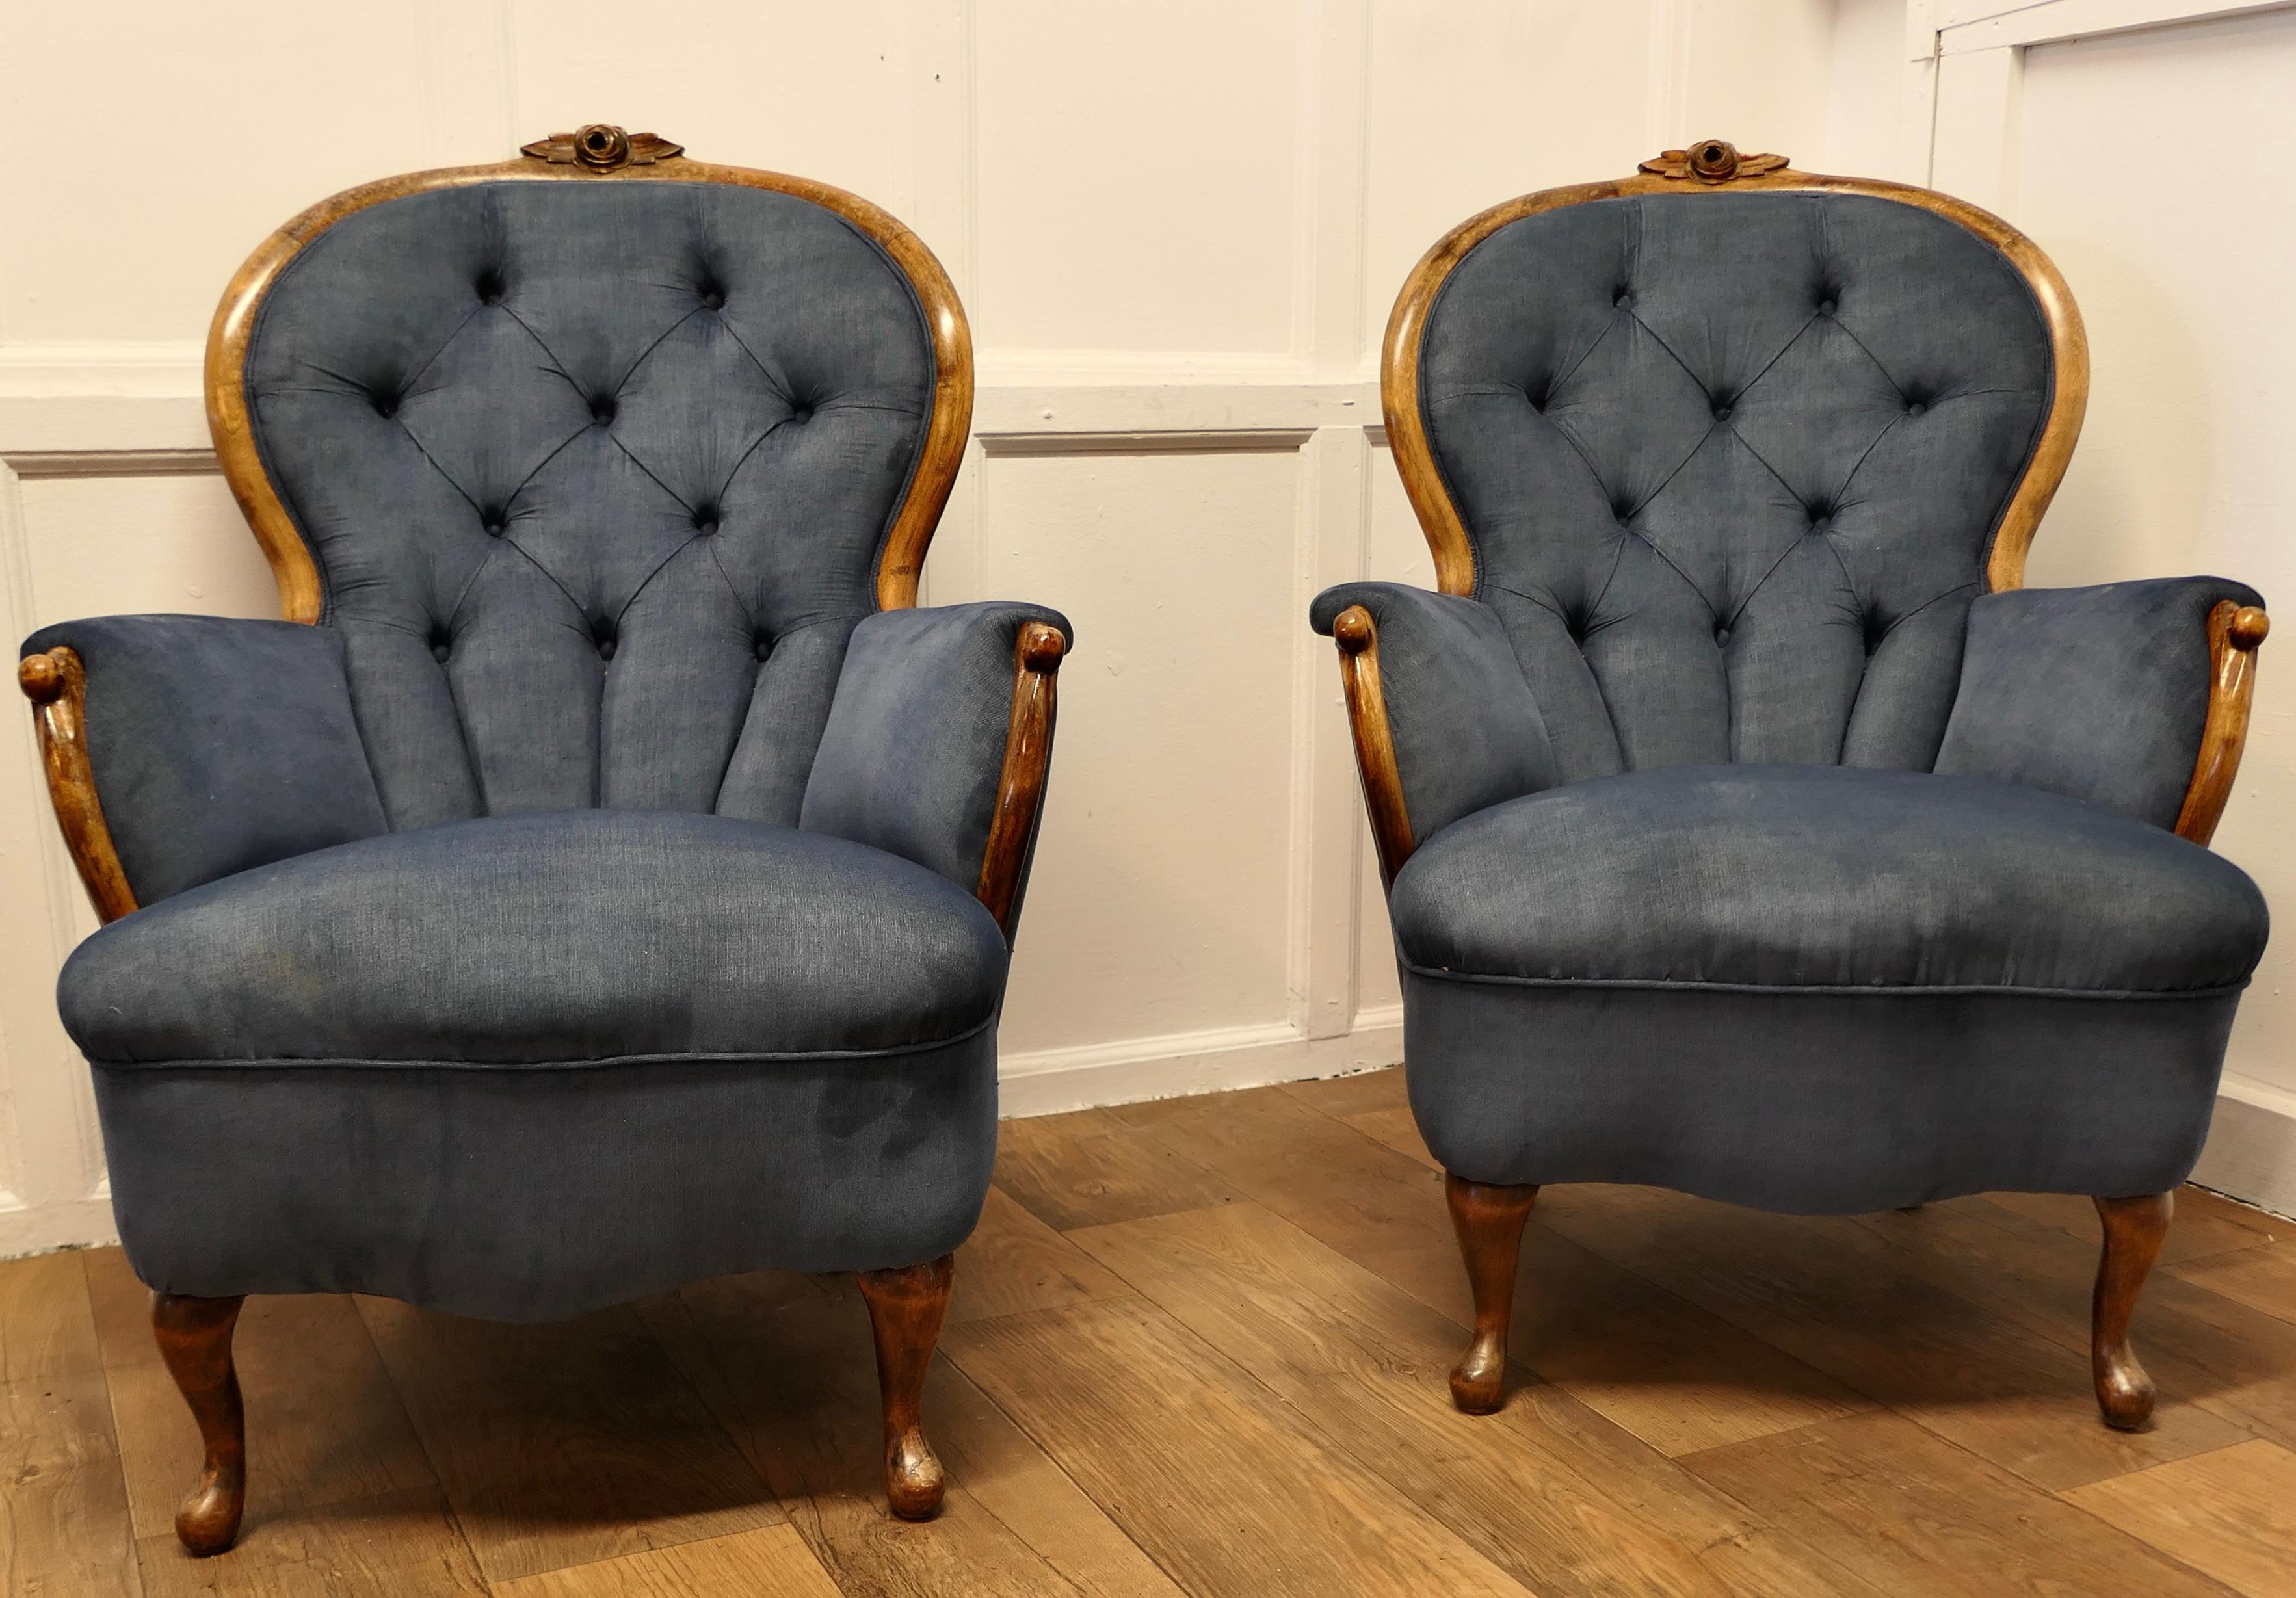 A Fine Quality Pair of French Walnut Button Back Salon Chairs

  These are superbly comfortable arm chairs, they have a rounded deeply buttoned back with a little carving in the Burr Walnut show wood
The Chairs has been upholstered in a fine needle